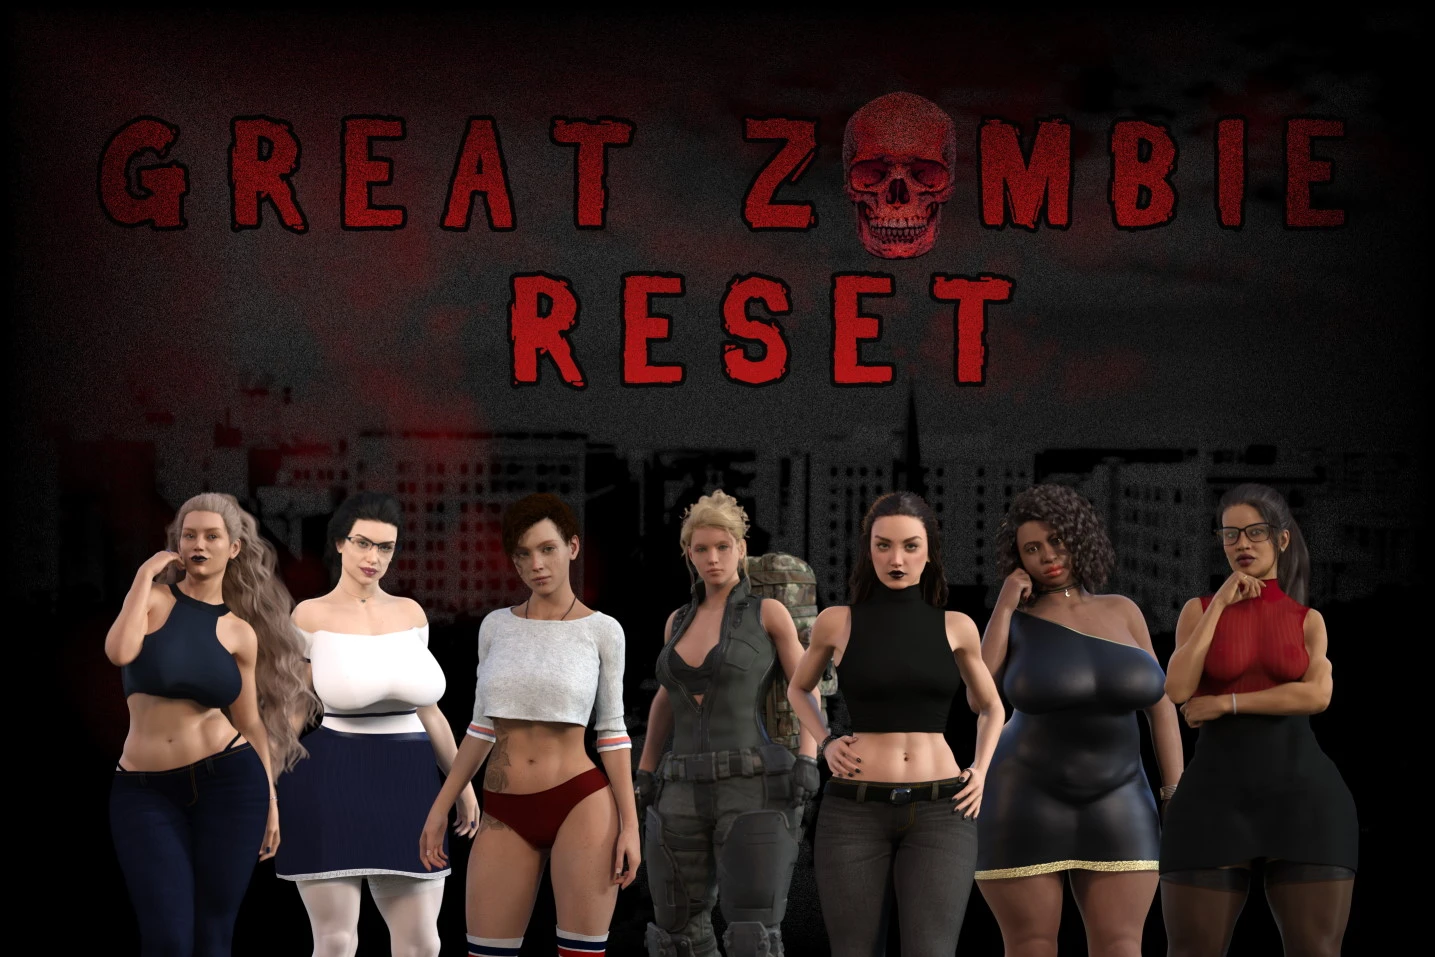 The Great Zombie Reset main image